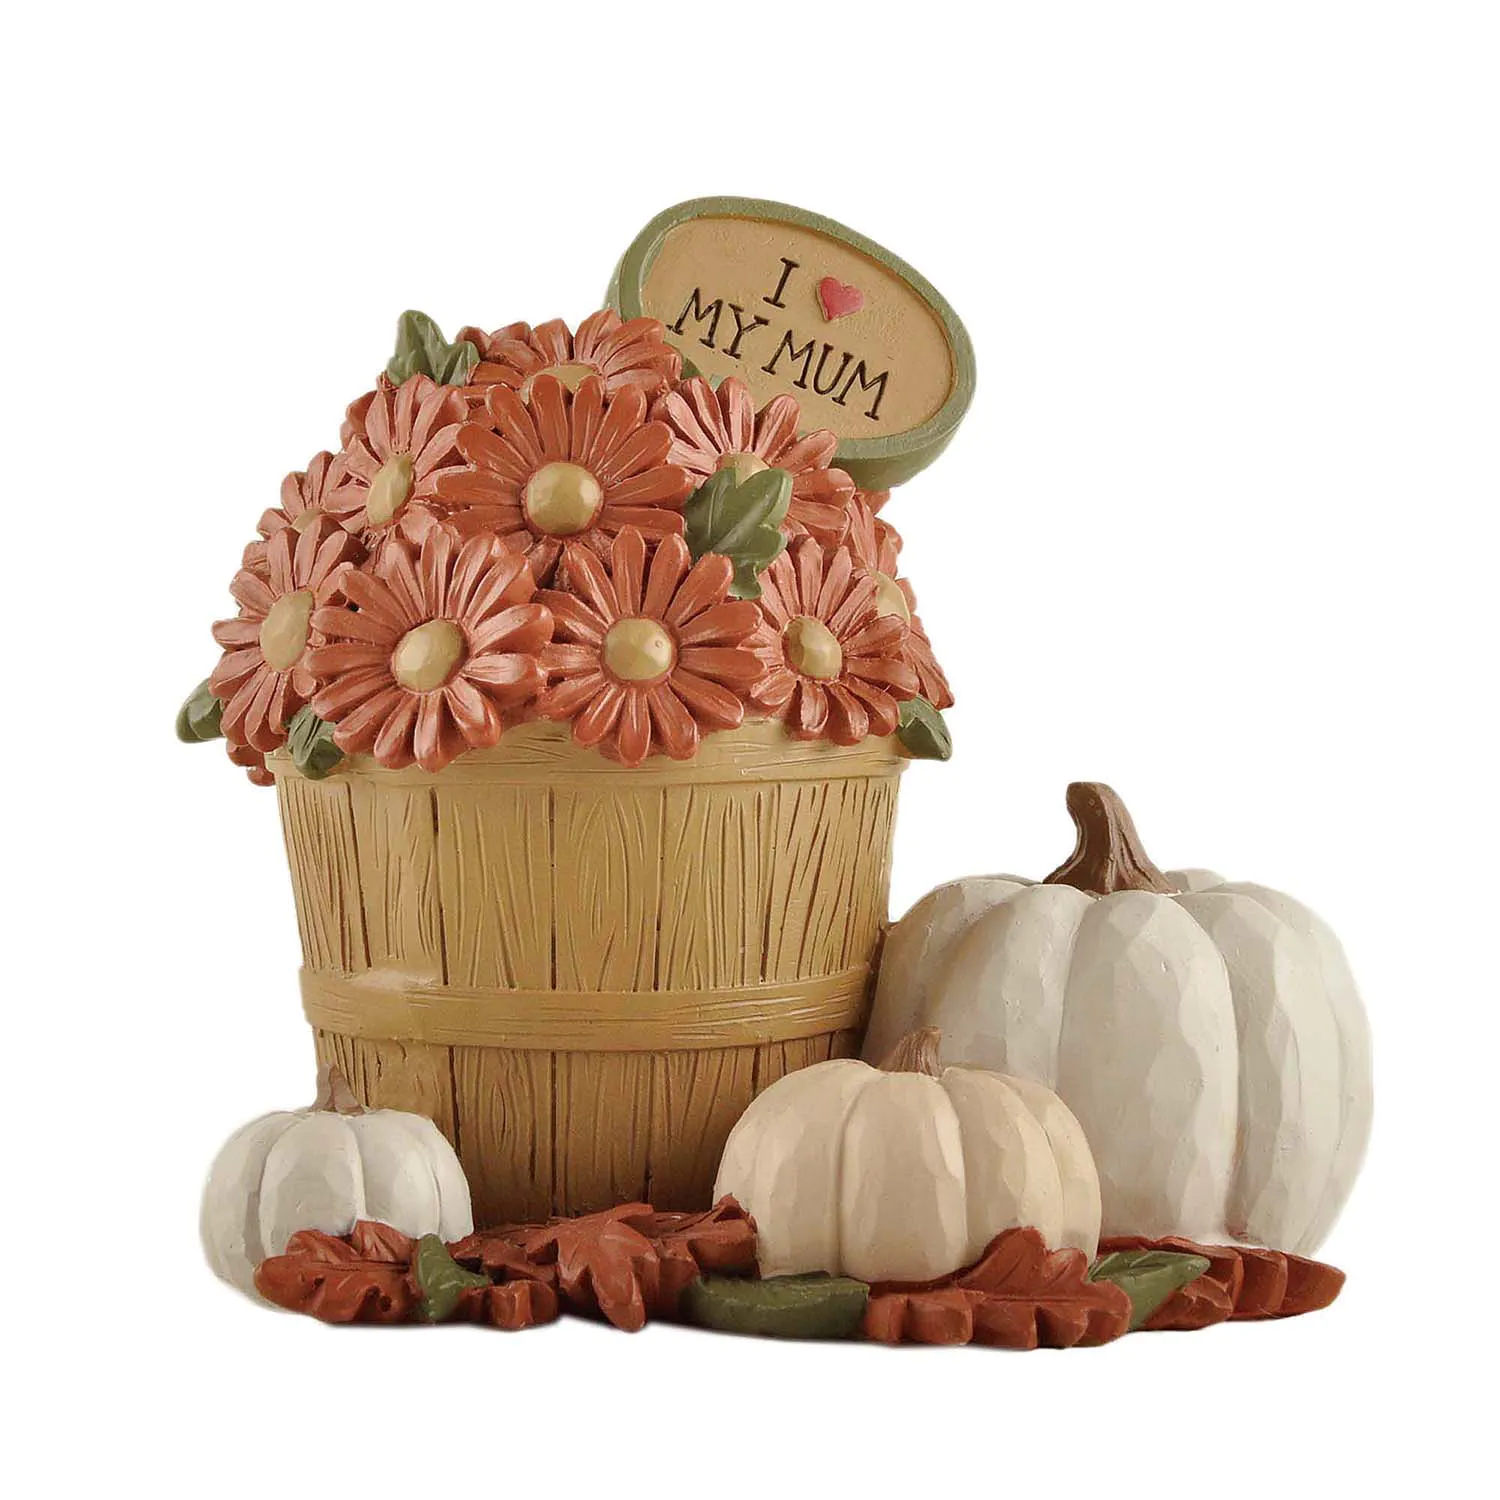 Hot Sale New Resin Crafts Flowerpot with Pumpkins for Home Decoration236-13869